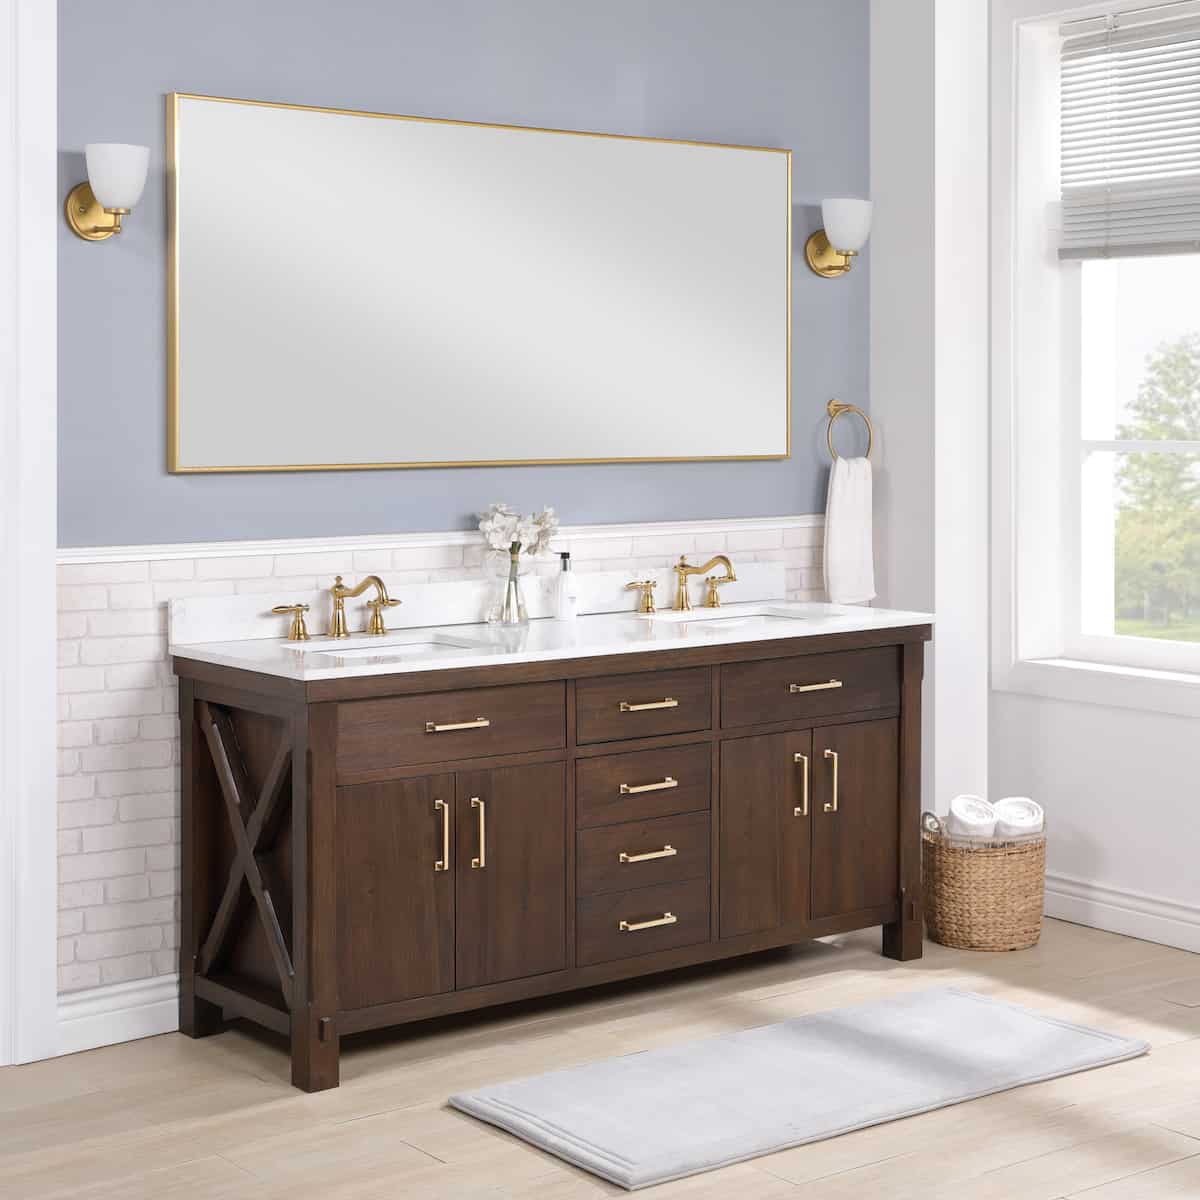 Vinnova Viella 72 Inch Freestanding Double Sink Bath Vanity in Deep Walnut Finish with White Composite Countertop With Mirror Side 701872-DW-WS